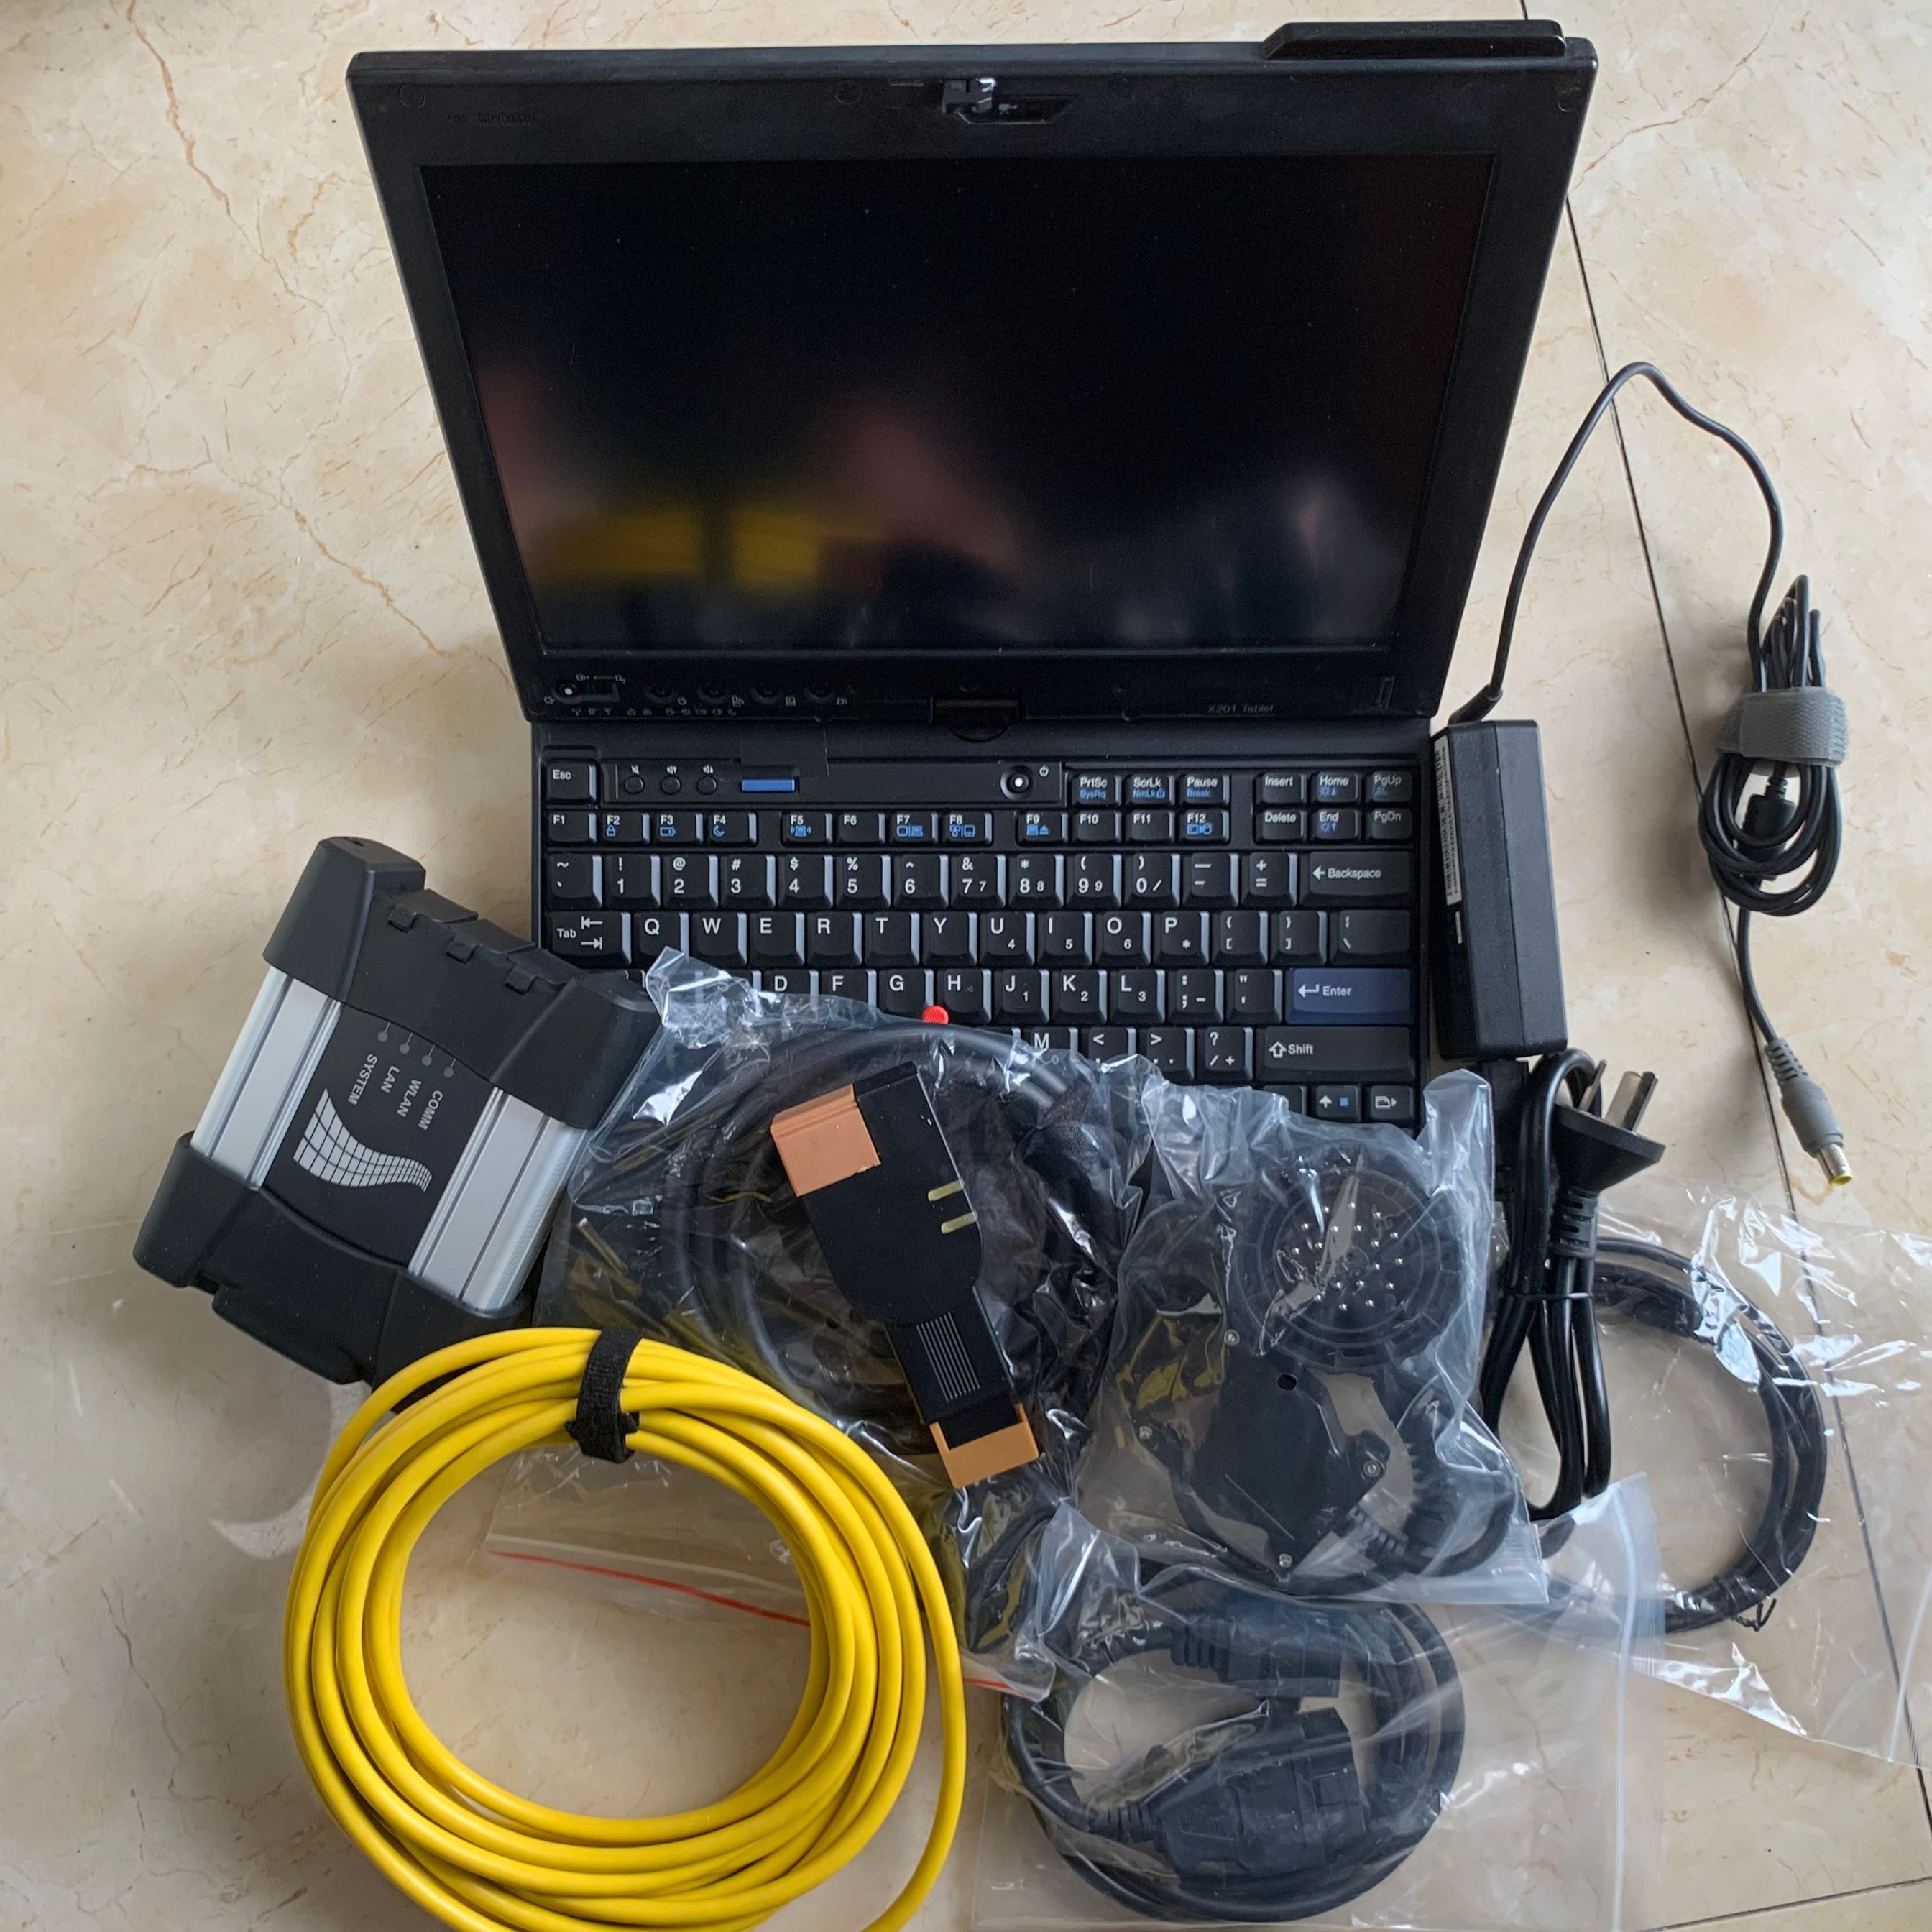 Tool for BMW icom NEXT A2 Auto Diagnostic tool with latest S/oft-ware V05.2024 win10 installed Well on X201 I7 CPU 8G Used laptop 1TB HDD Ready to Work